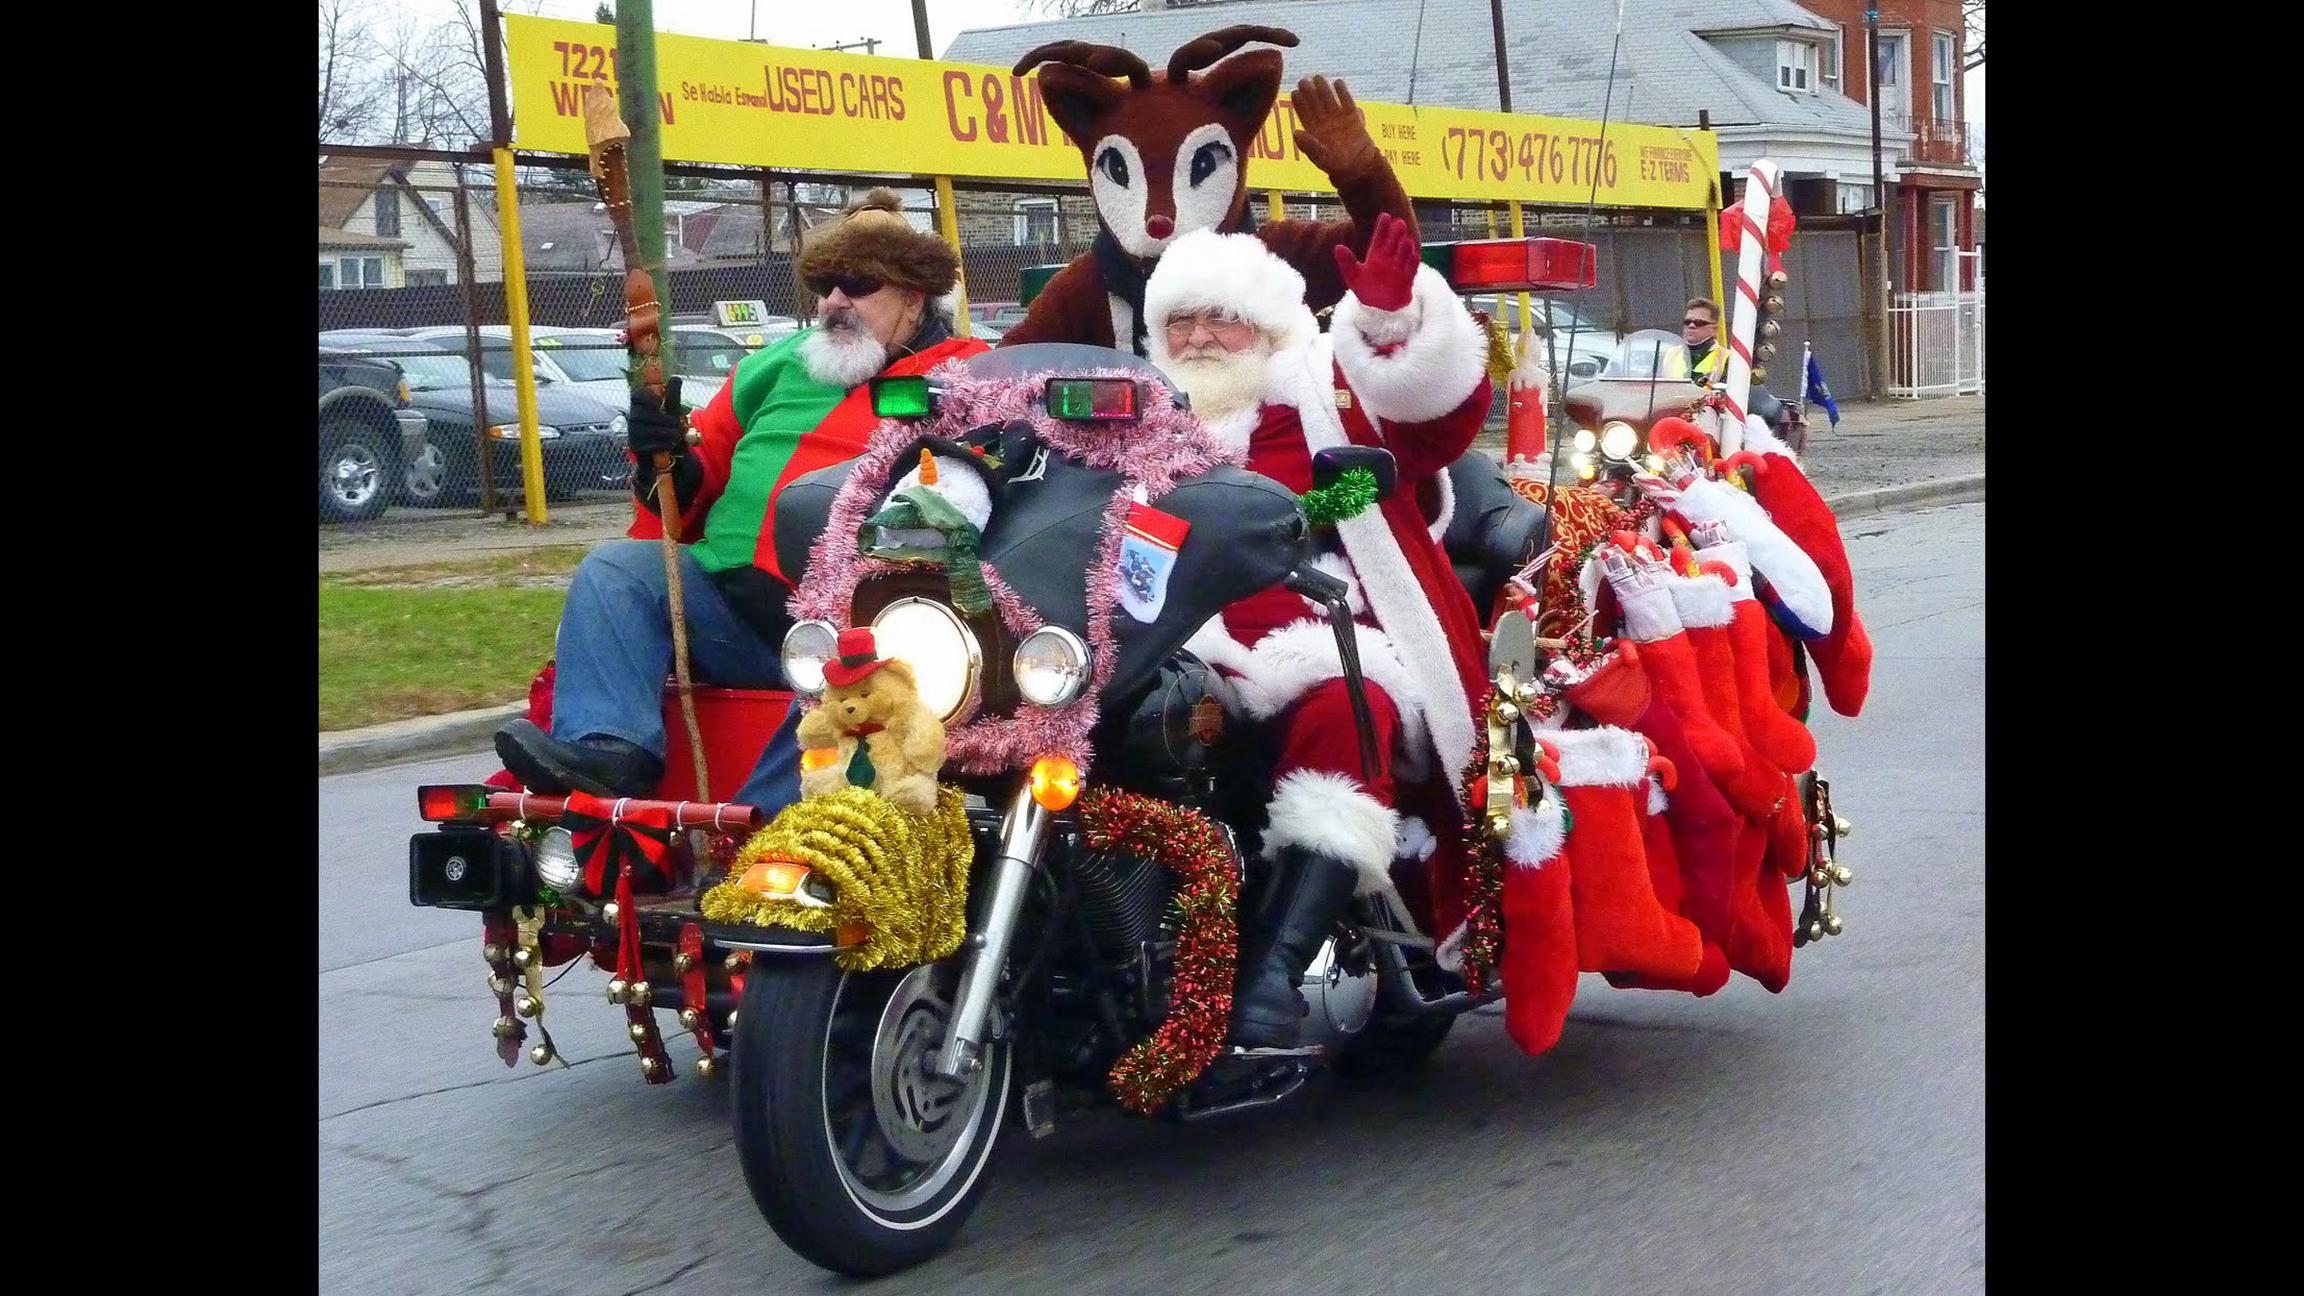 Santa swaps his sleigh for a motorcycle this weekend. Spot him along Western Avenue. (Jack Voss / Chicago Toys for Tots Motorcycle Parade)